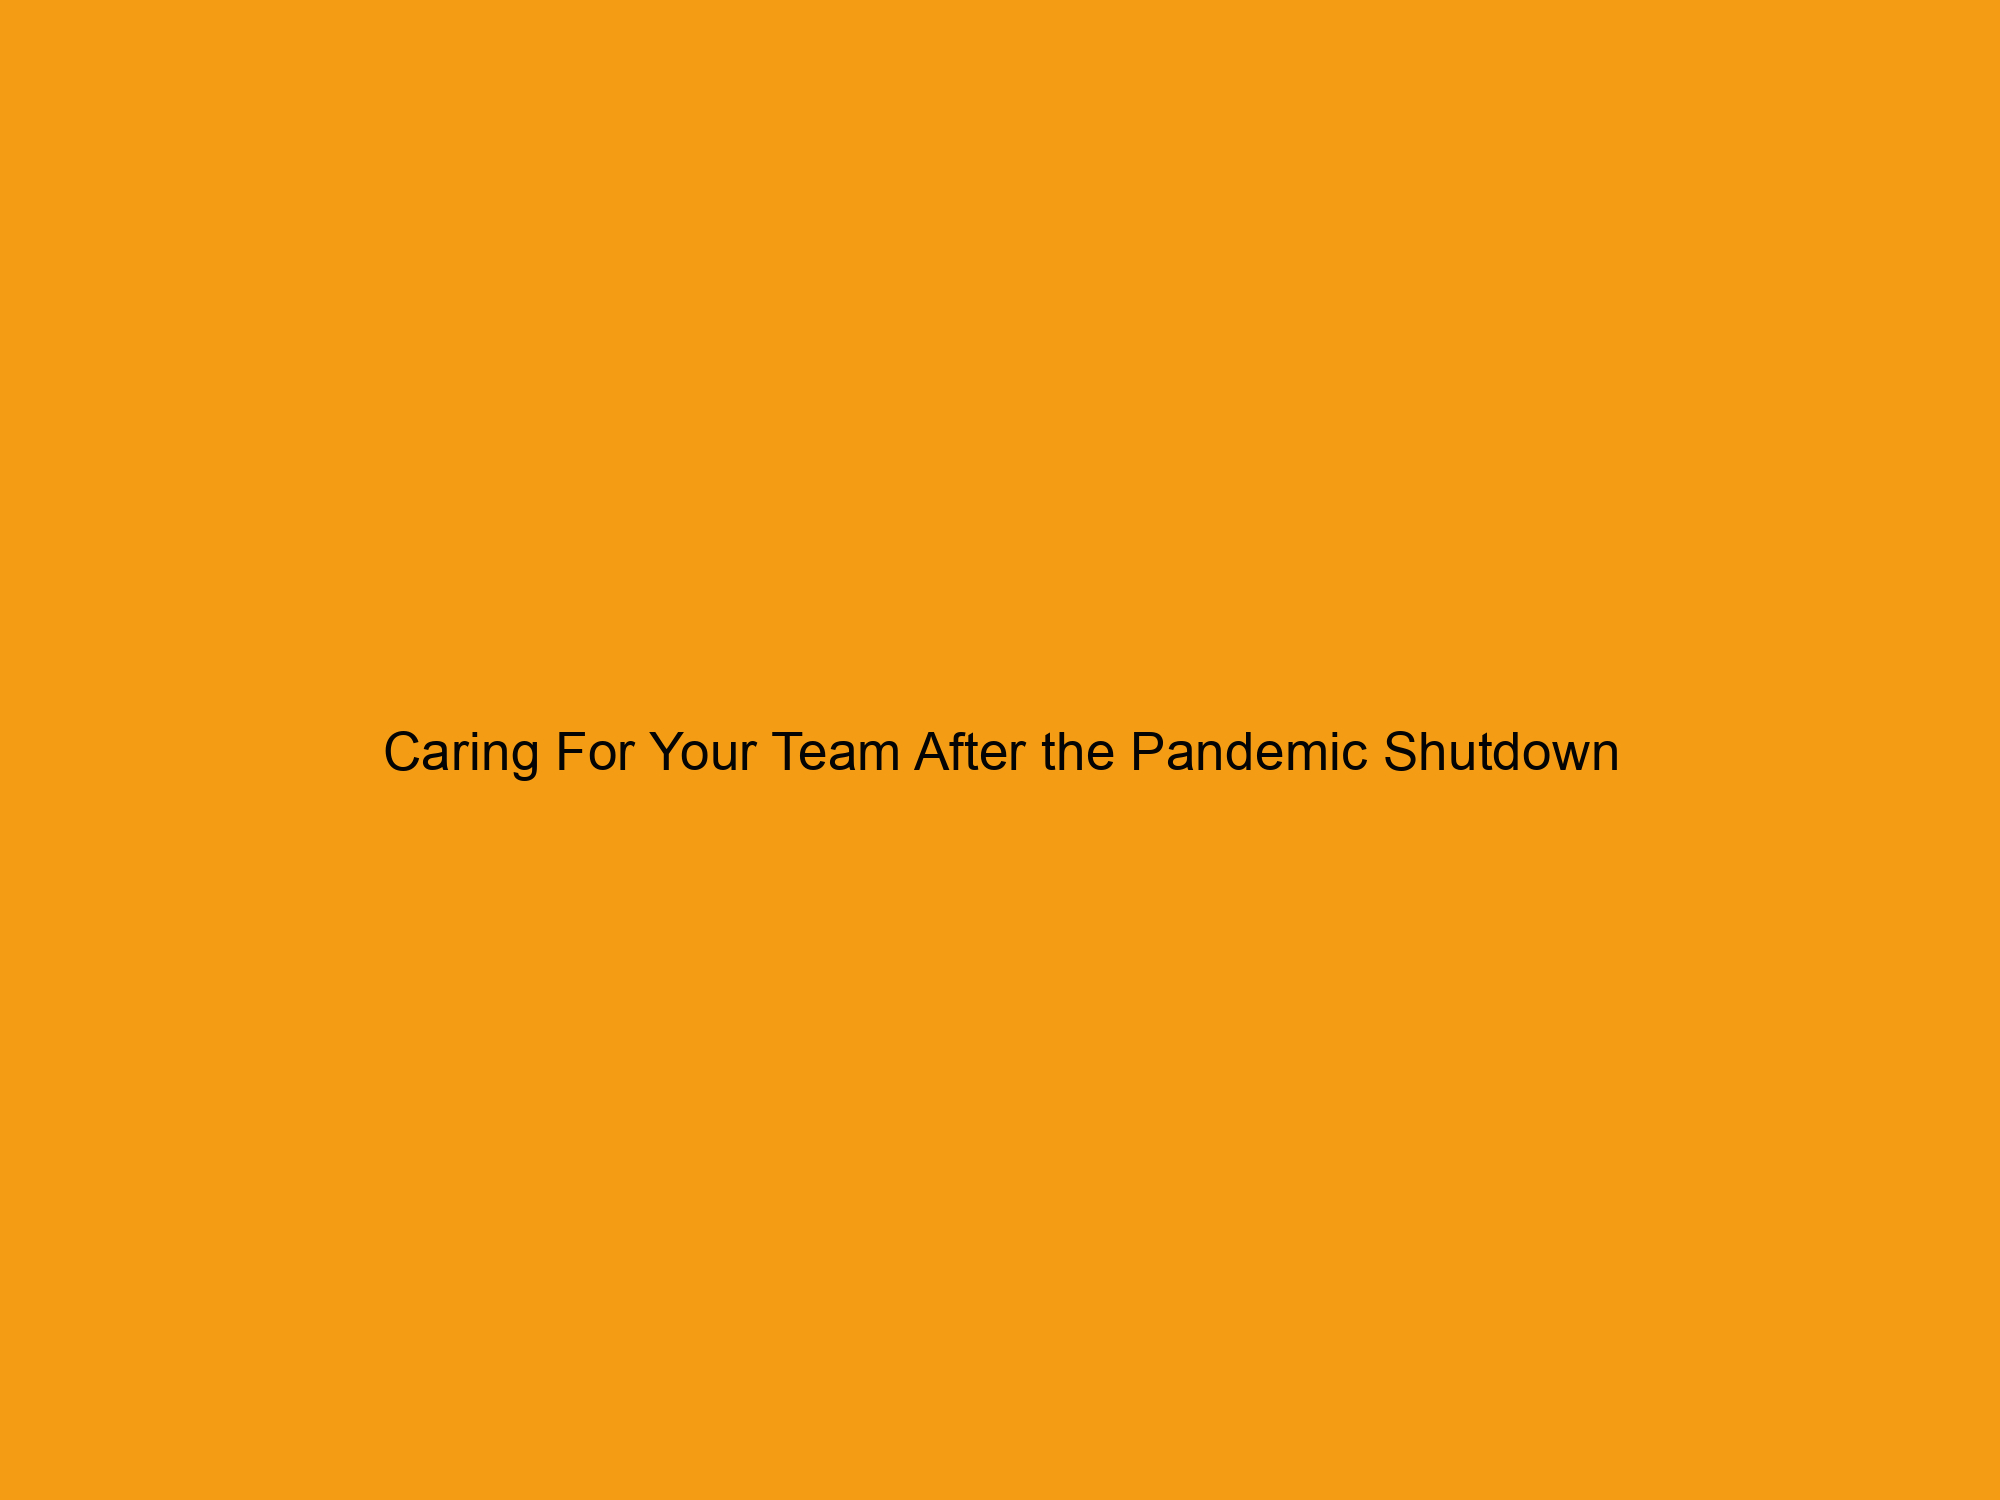 Caring For Your Team After the Pandemic Shutdown